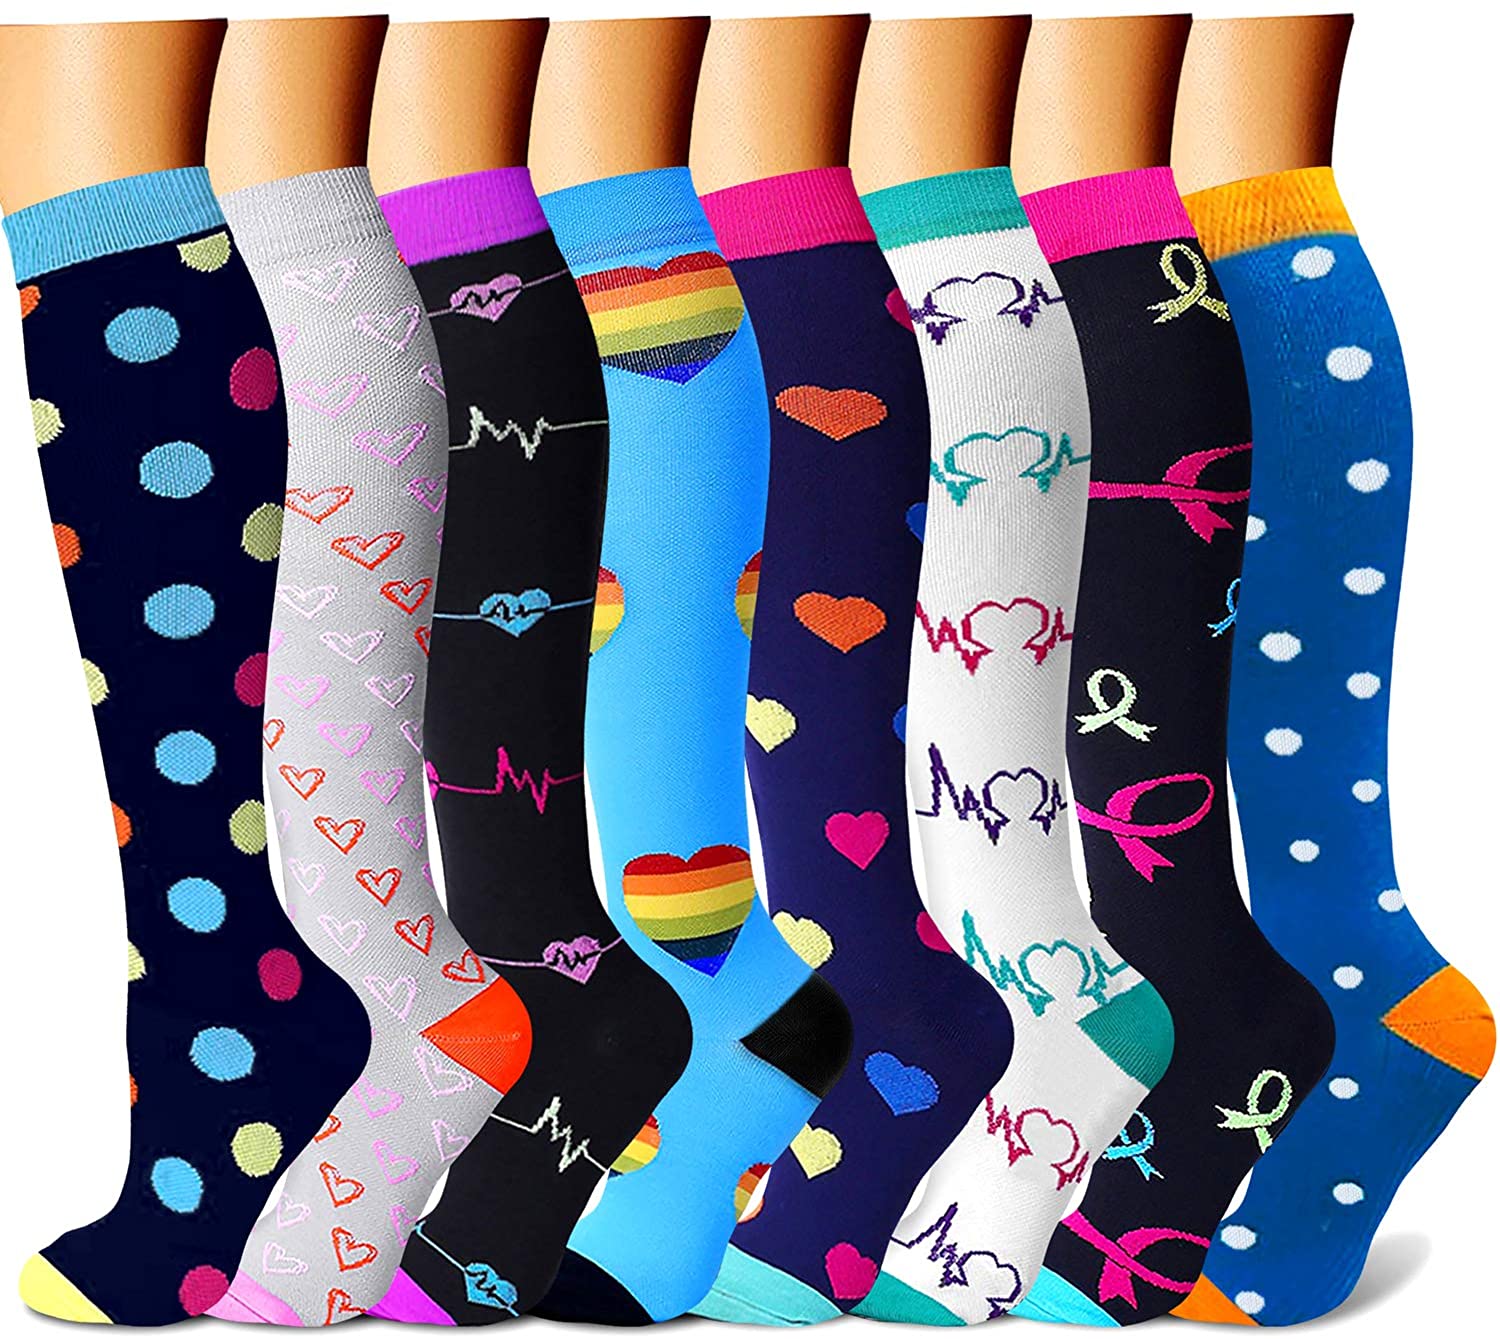 15 20 Mmhg Compression Socks - About You